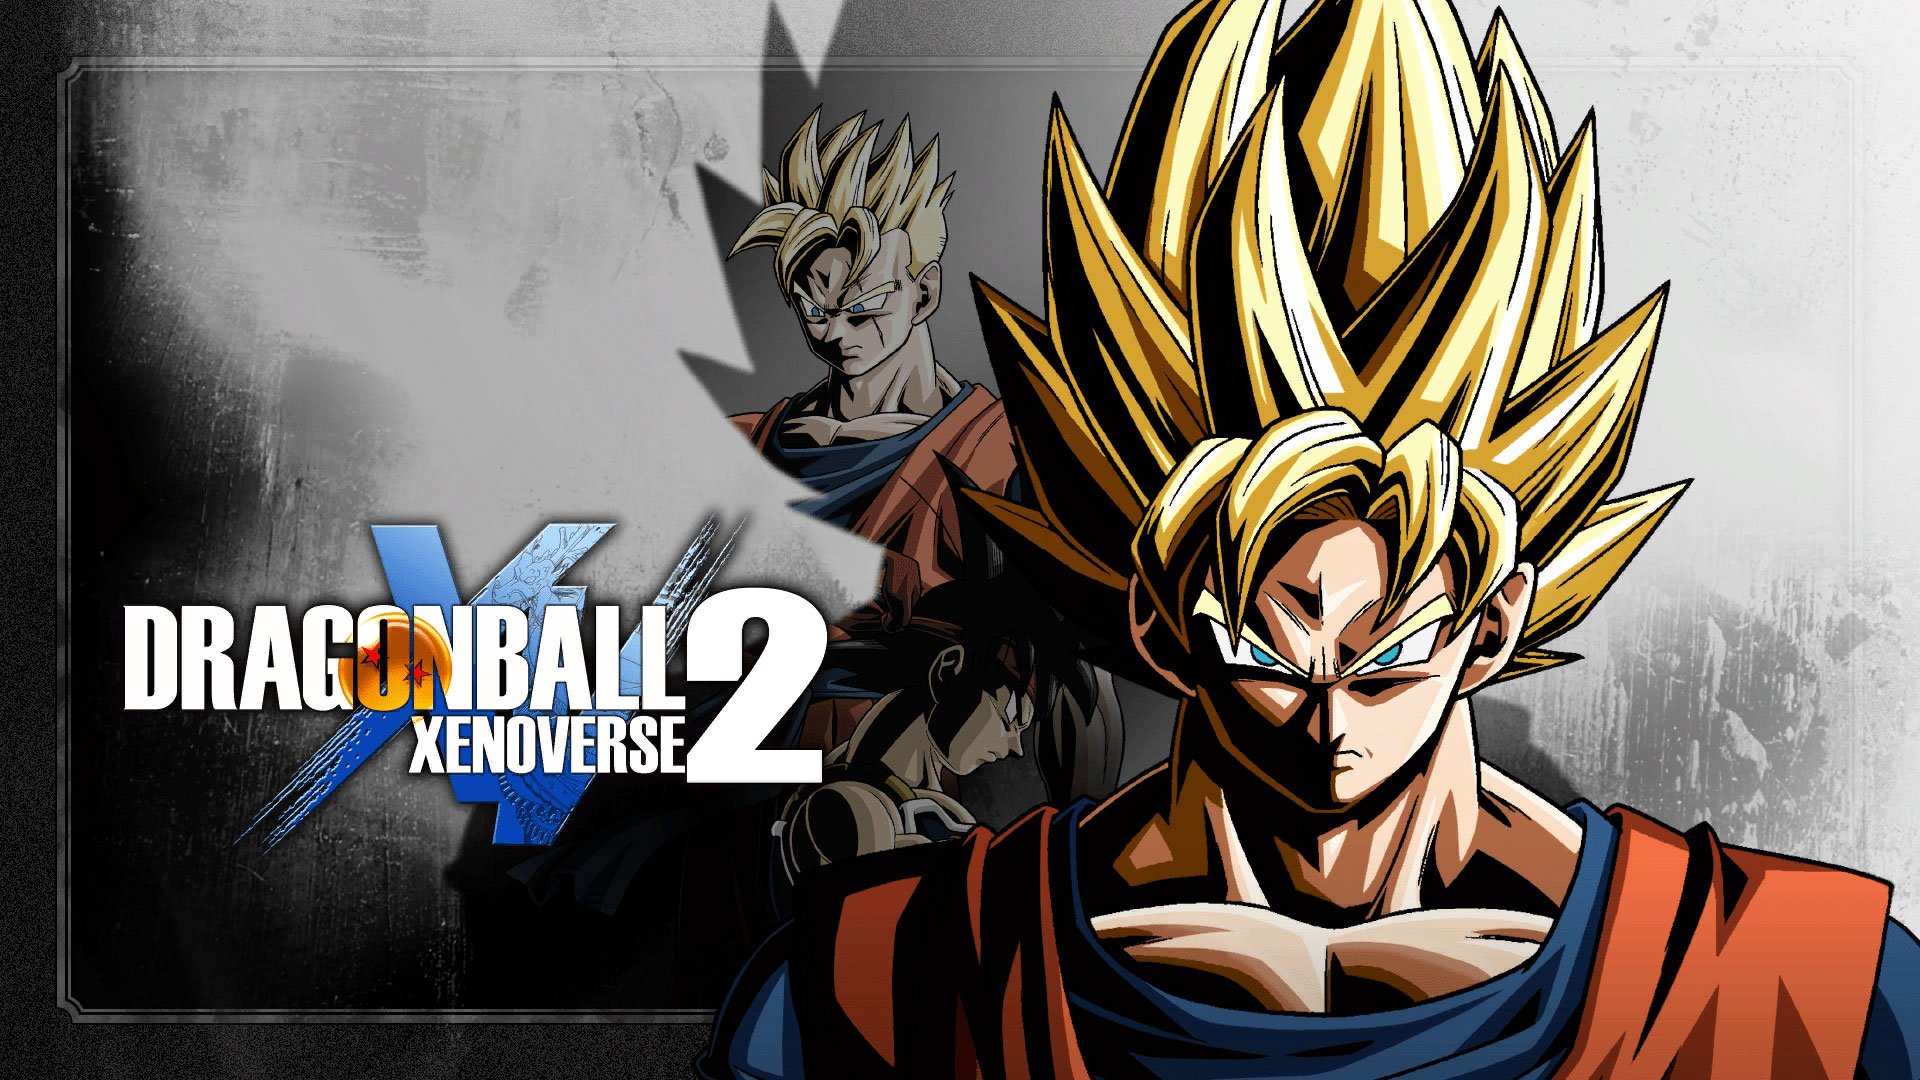 Dragon Ball Xenoverse 2 PC Download Game For Free